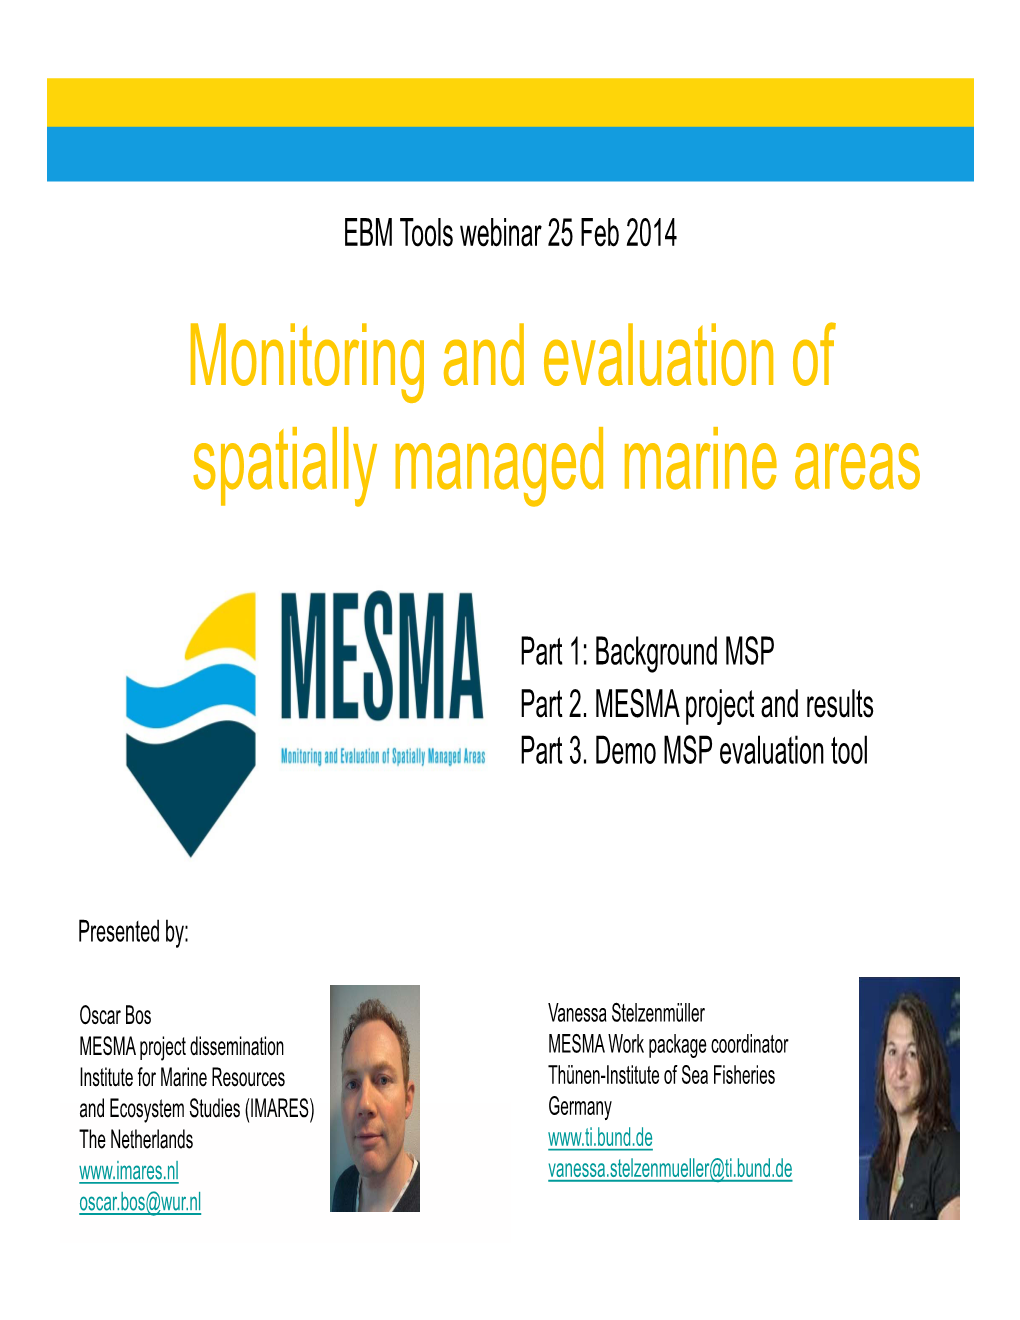 Monitoring and Evaluation of Spatially Managed Marine Areas